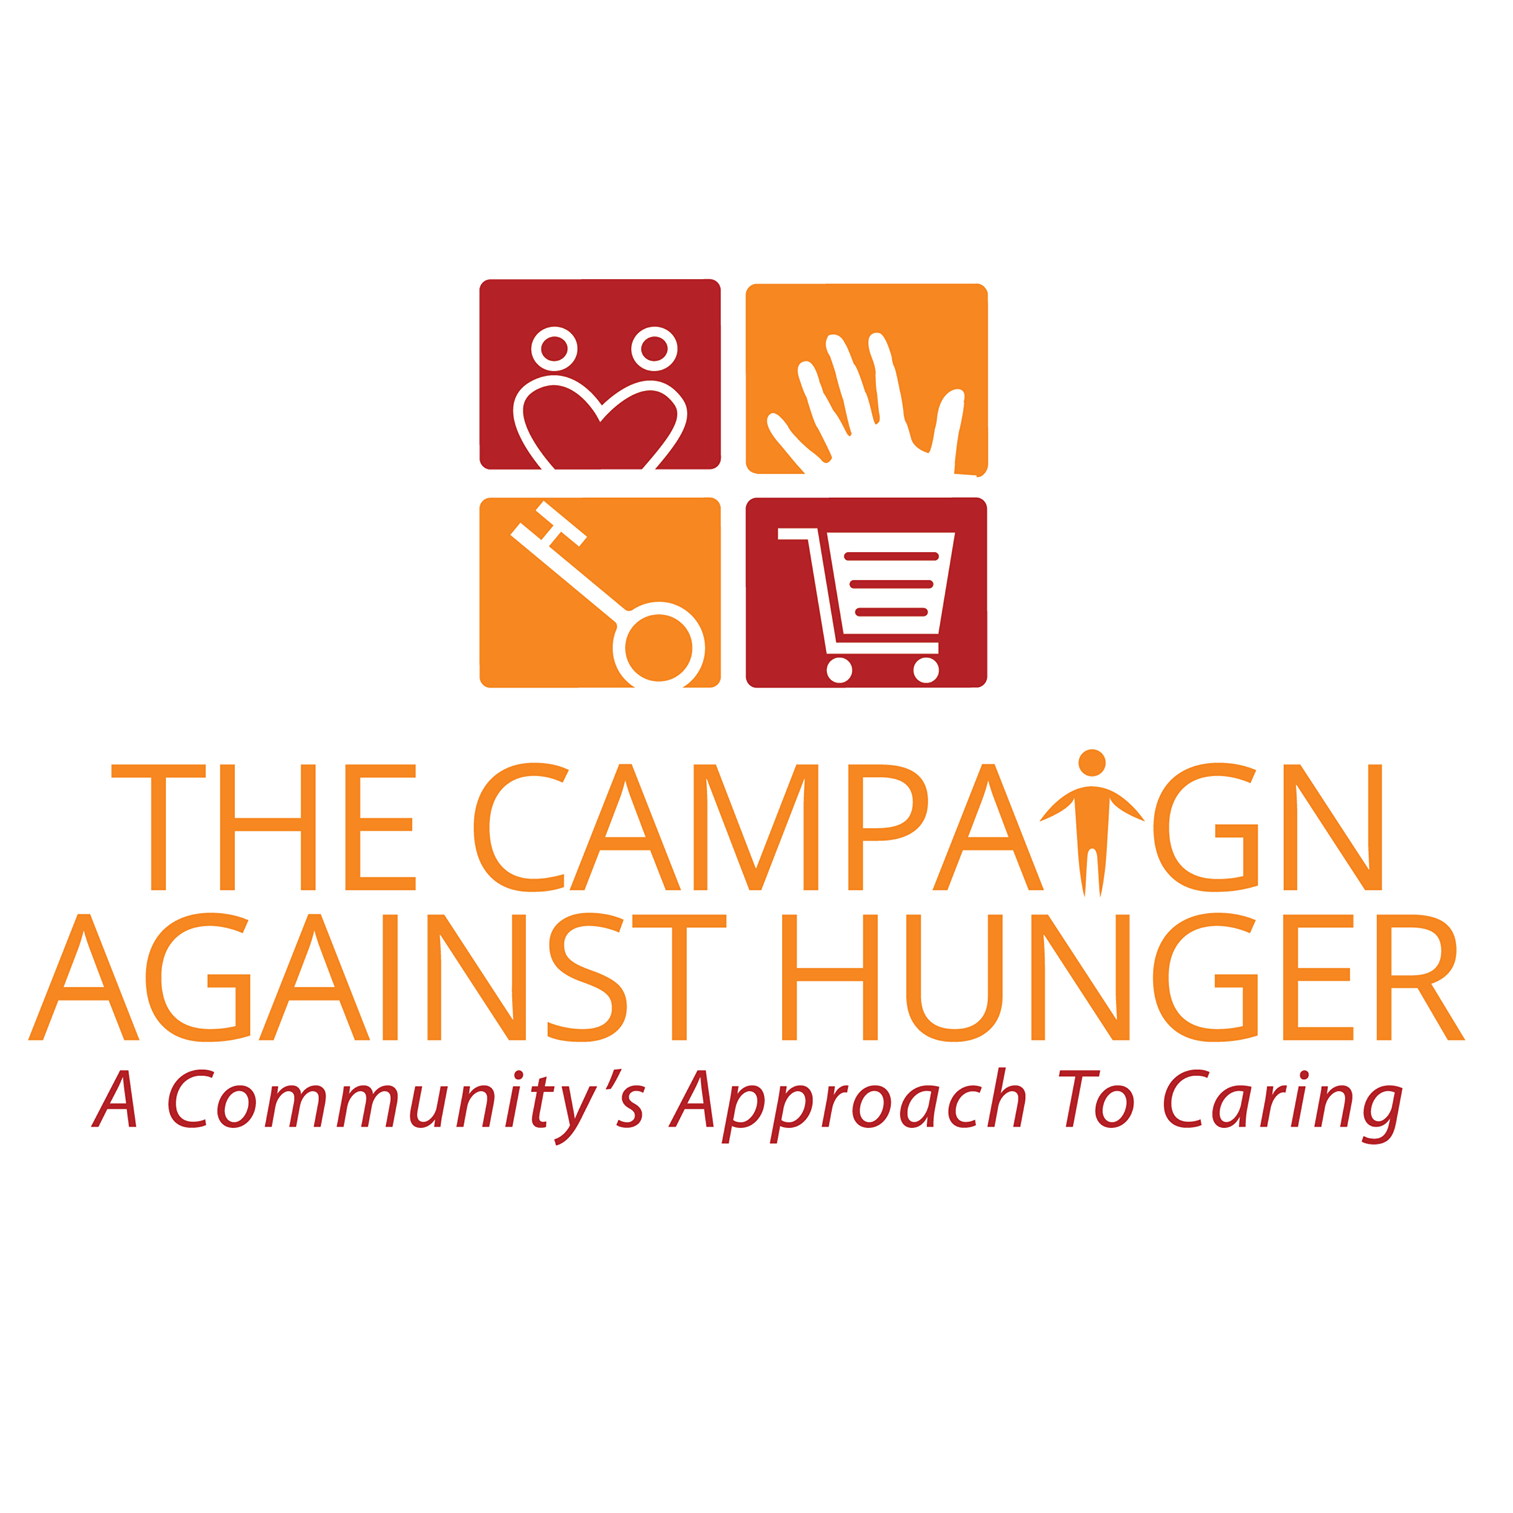 Healing Communities - The Campaign Against Hunger